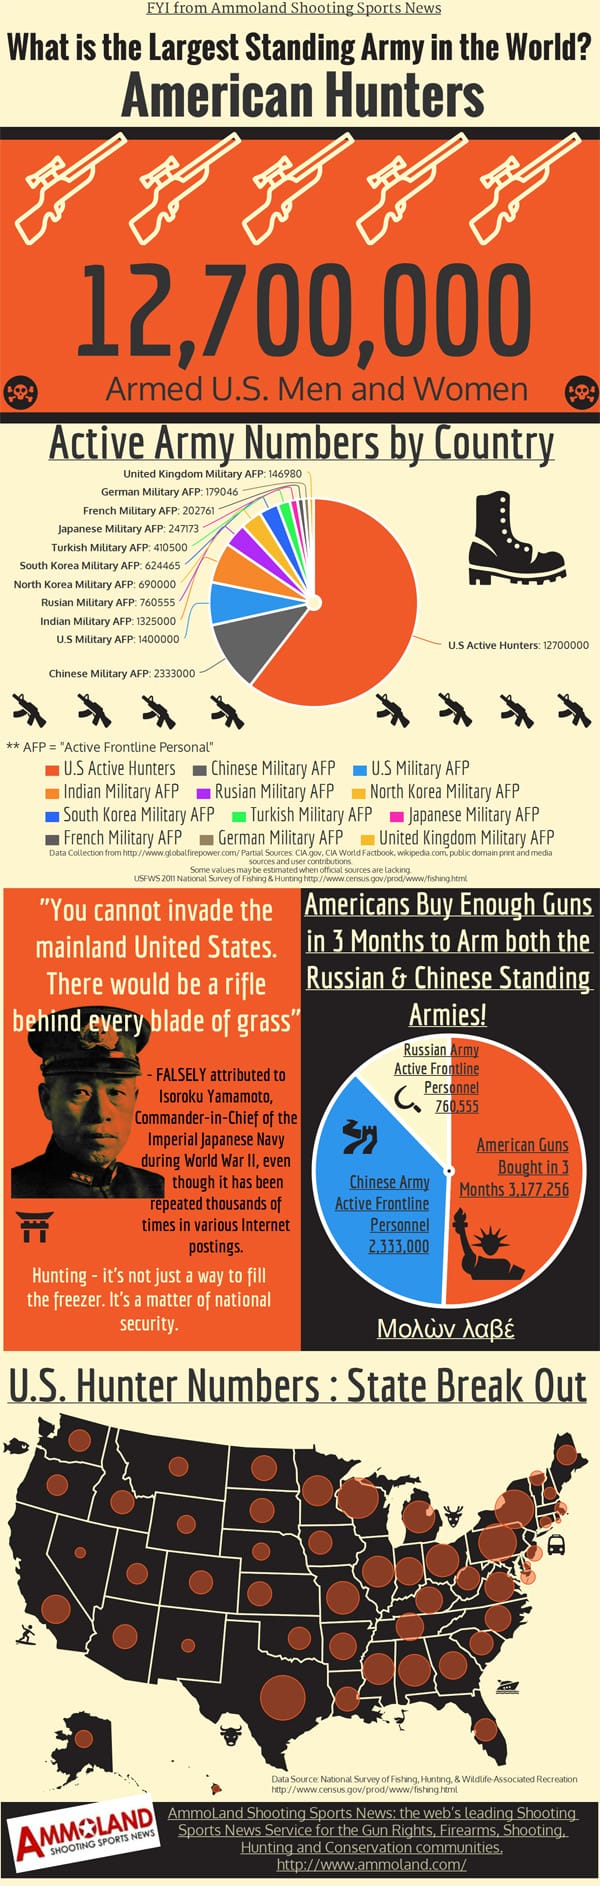 Largest Standing Army in the World is Not Who You'd Expect ~ InfoGraphic